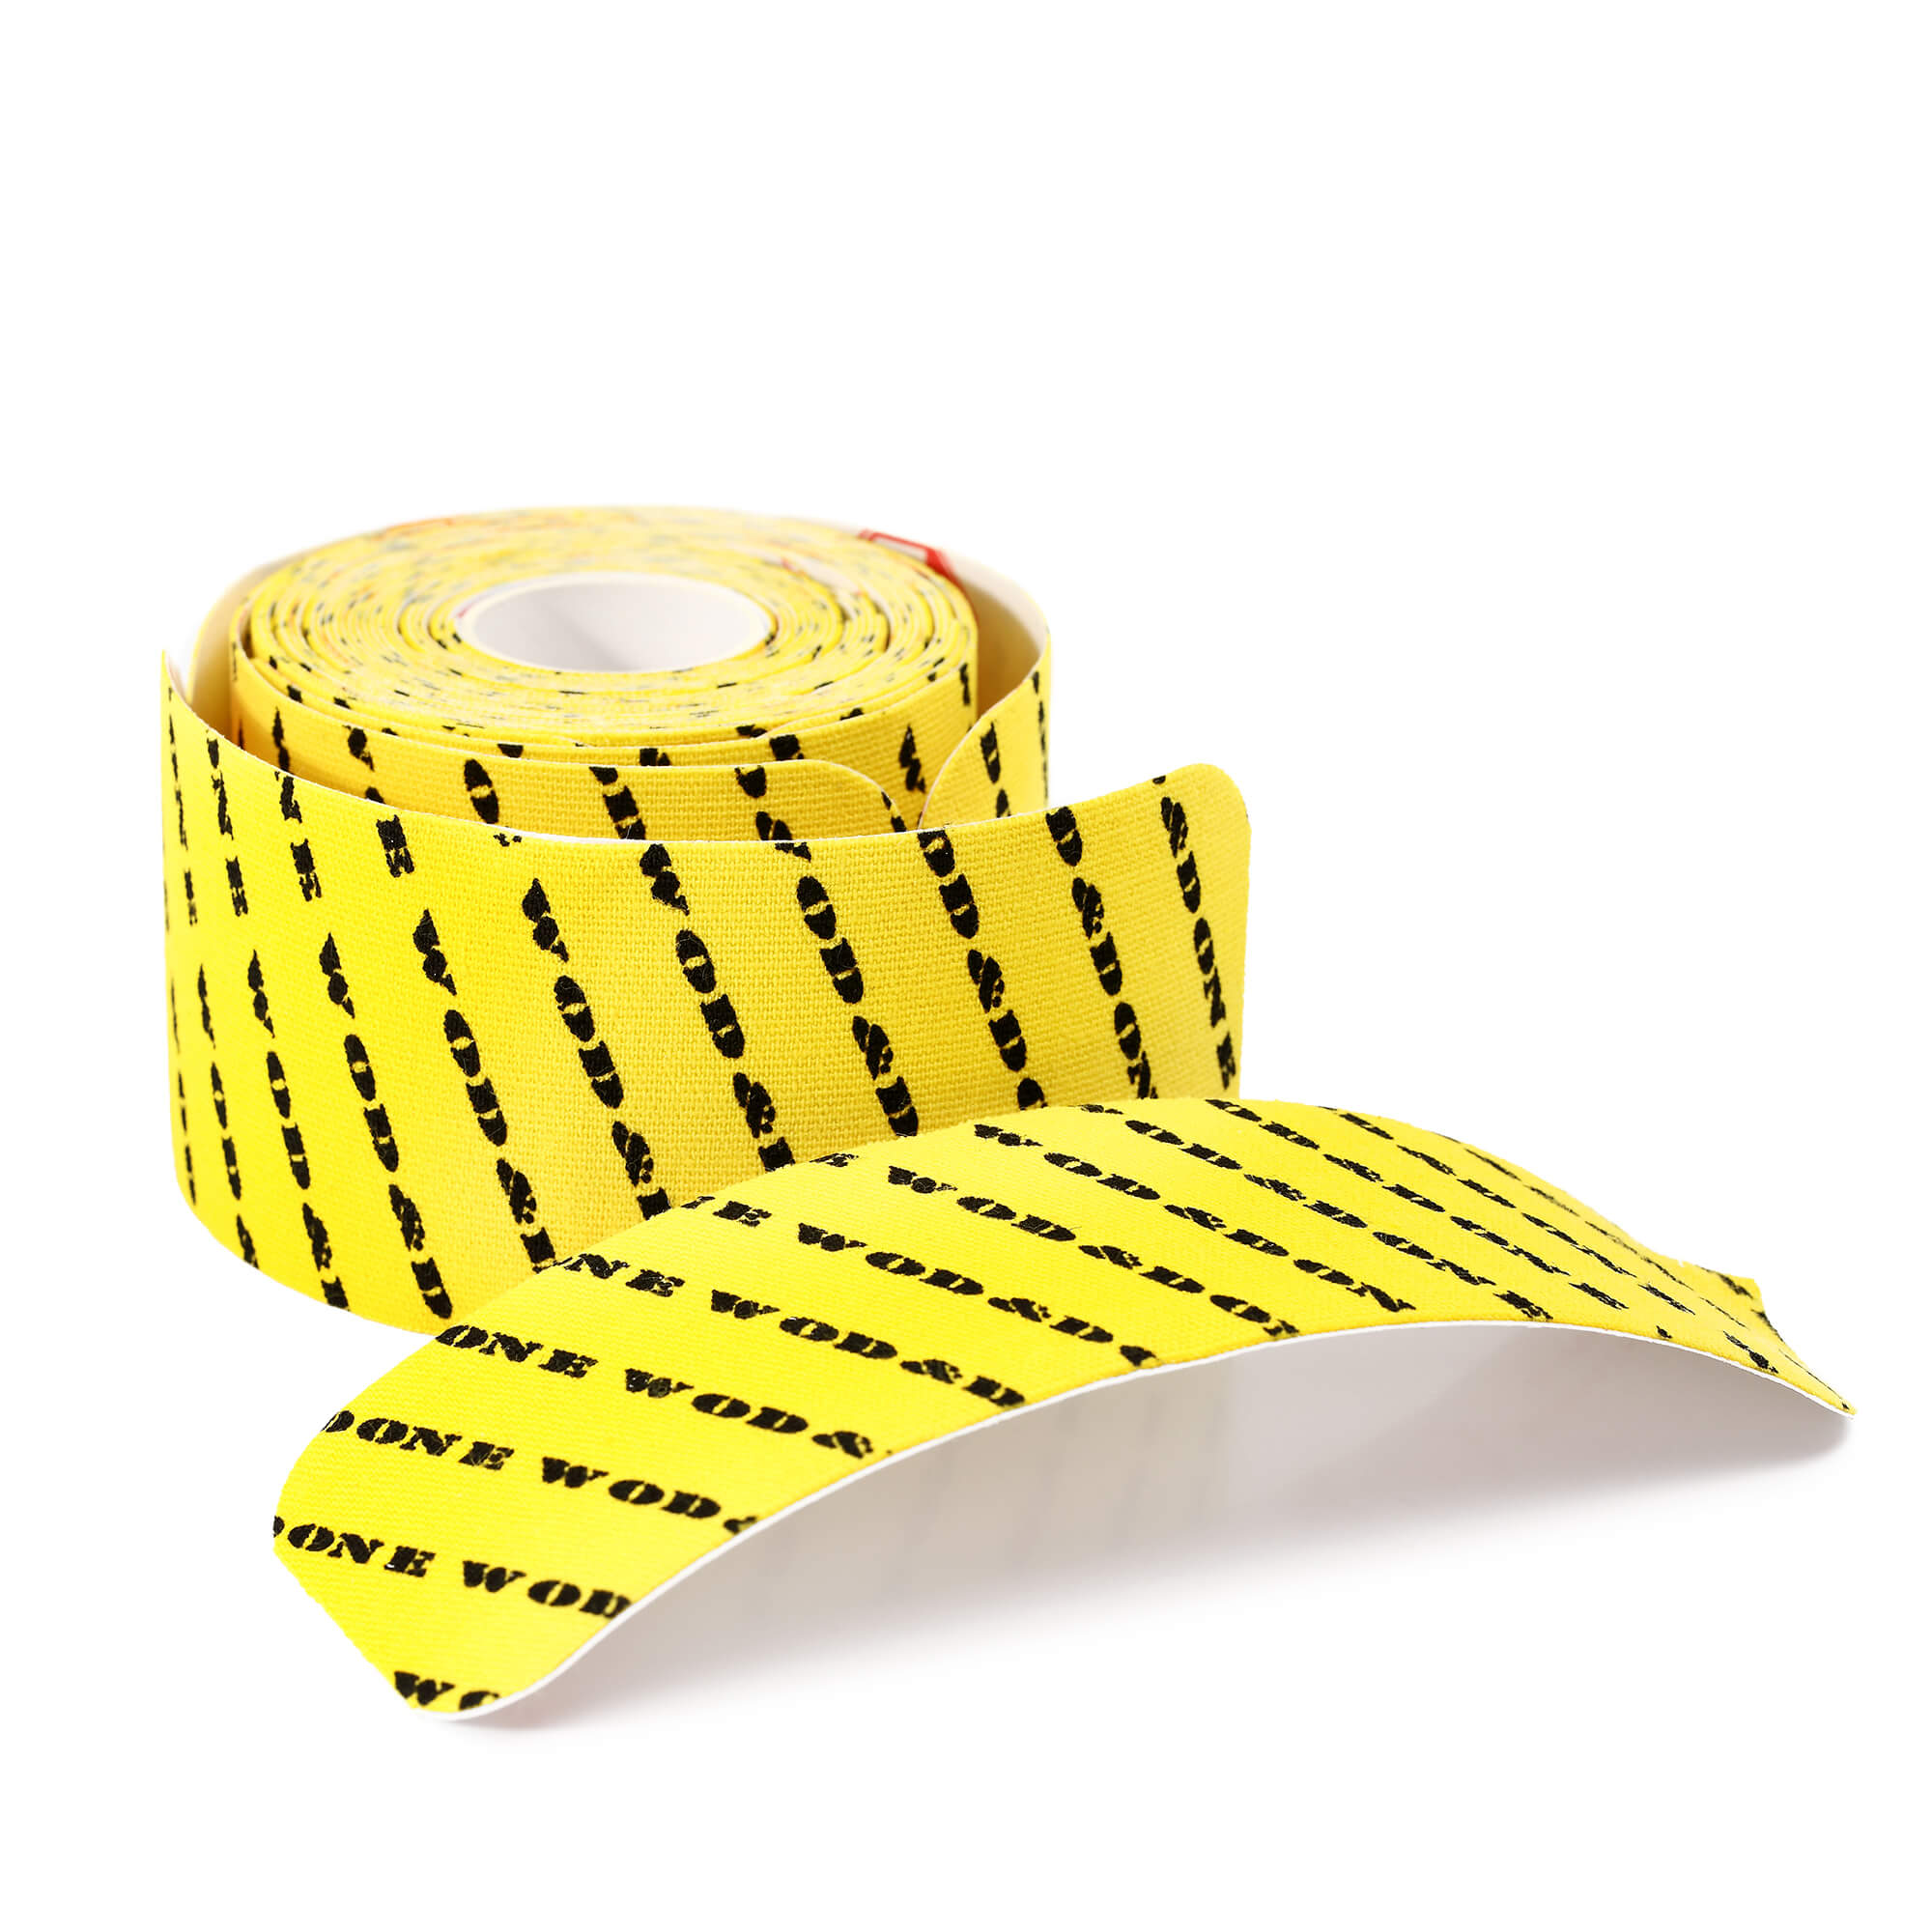 Precut Thumb Protection Tape Strips in a Roll (32 or 40 strips)